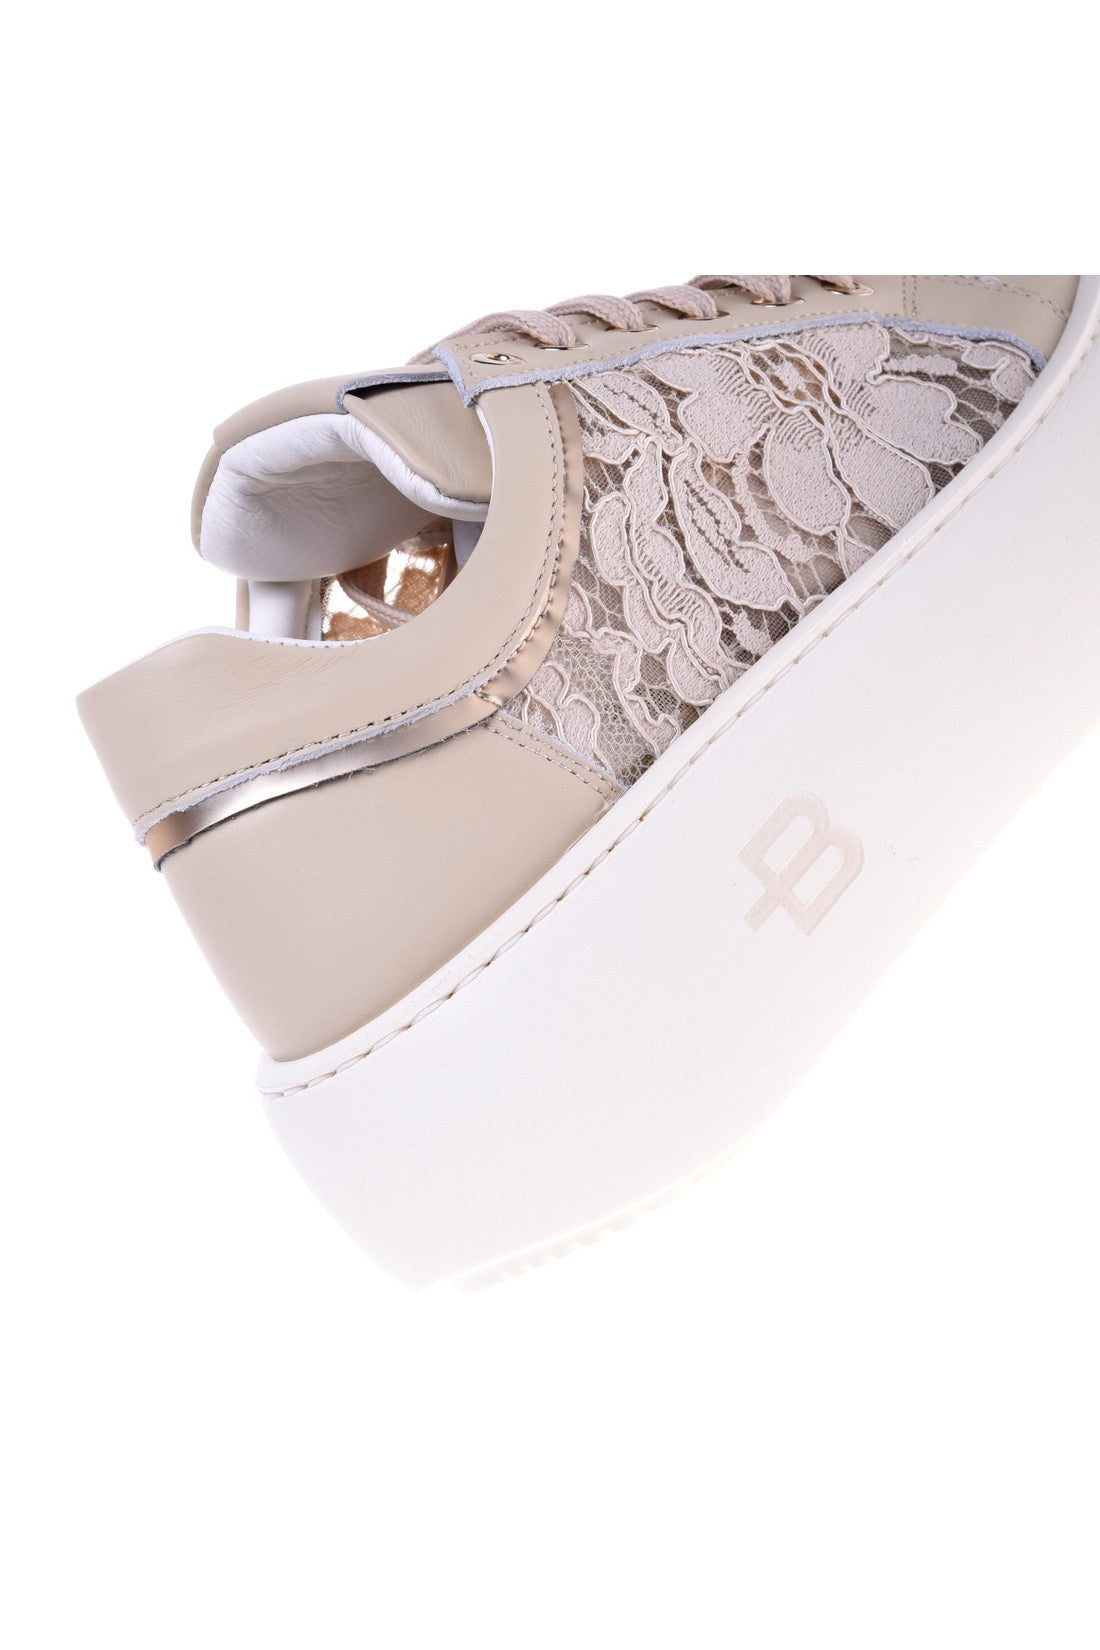 BALDININI-OUTLET-SALE-Sneaker-in-beige-nappa-leather-and-lace-Sneaker-ARCHIVE-COLLECTION-4.jpg